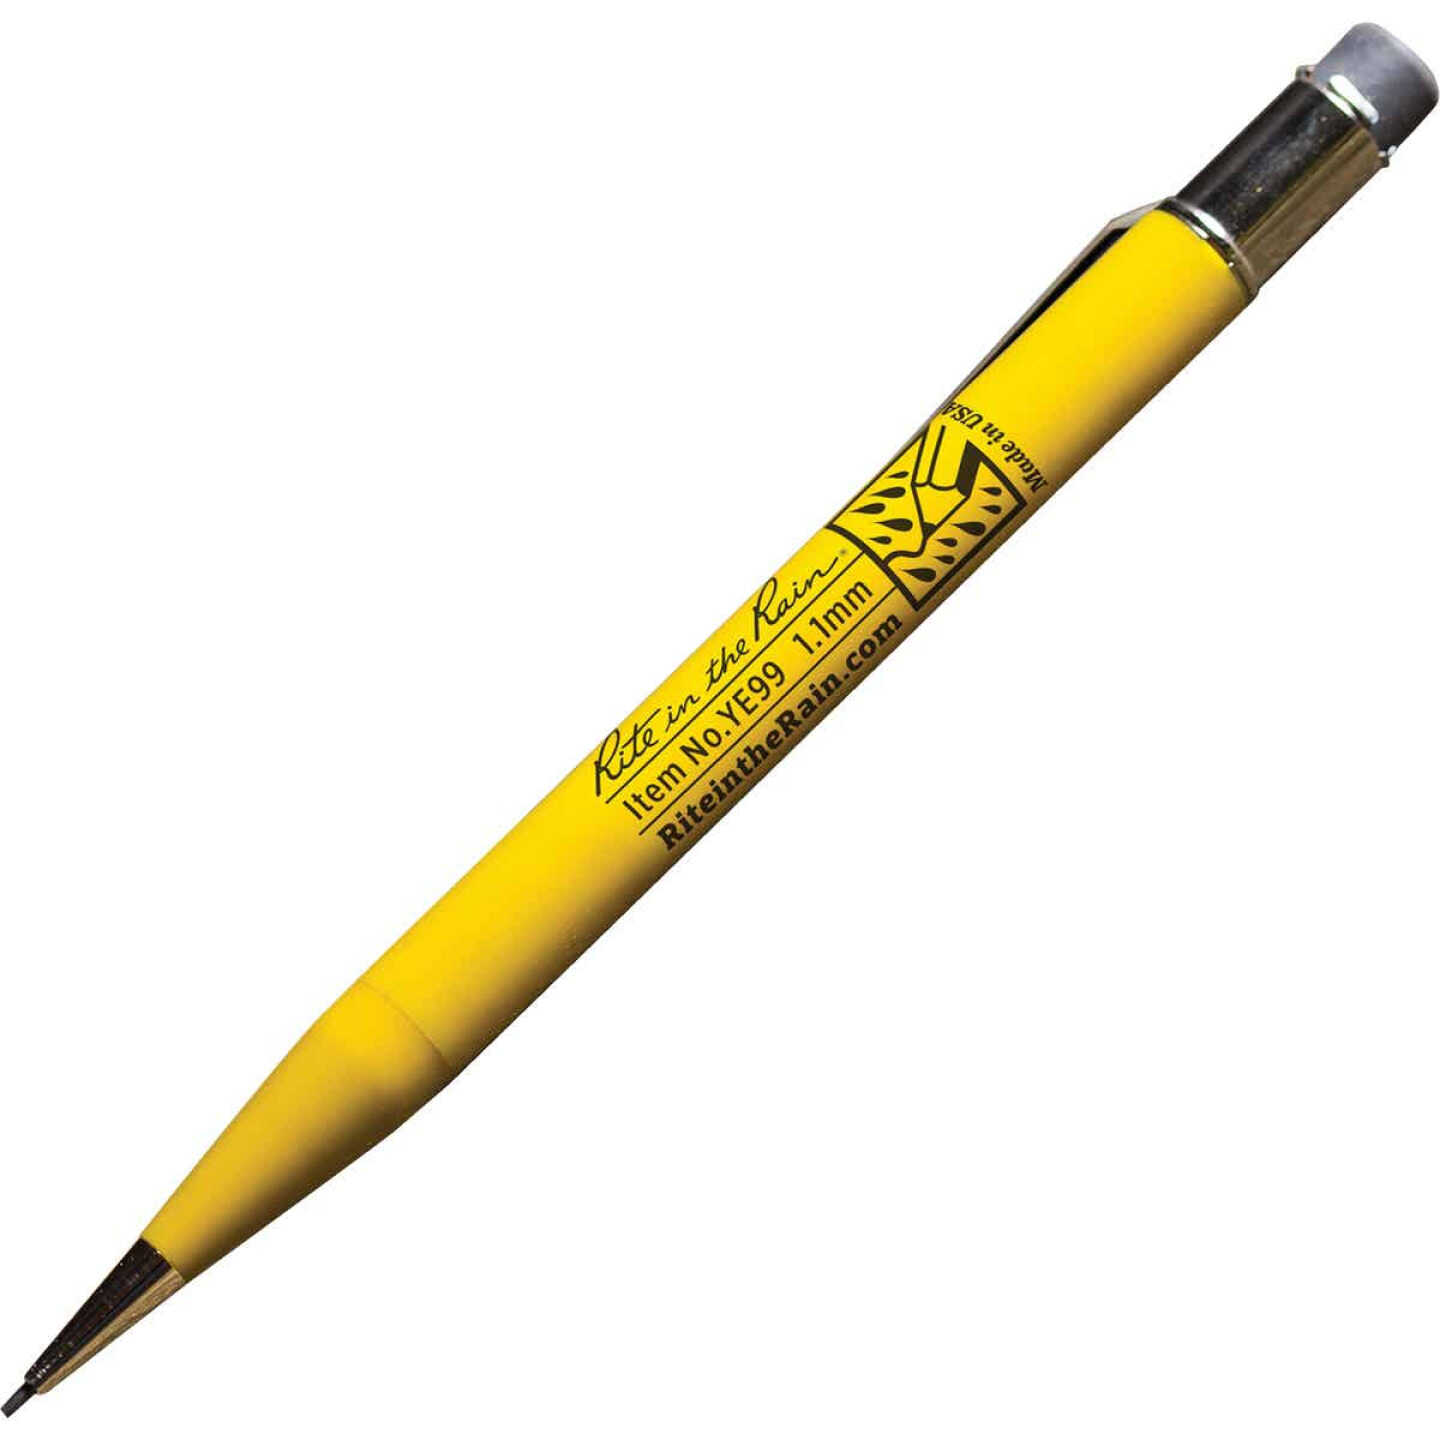 Rite in the Rain 1.1 mm Refillable All-Weather Mechanical Pencil